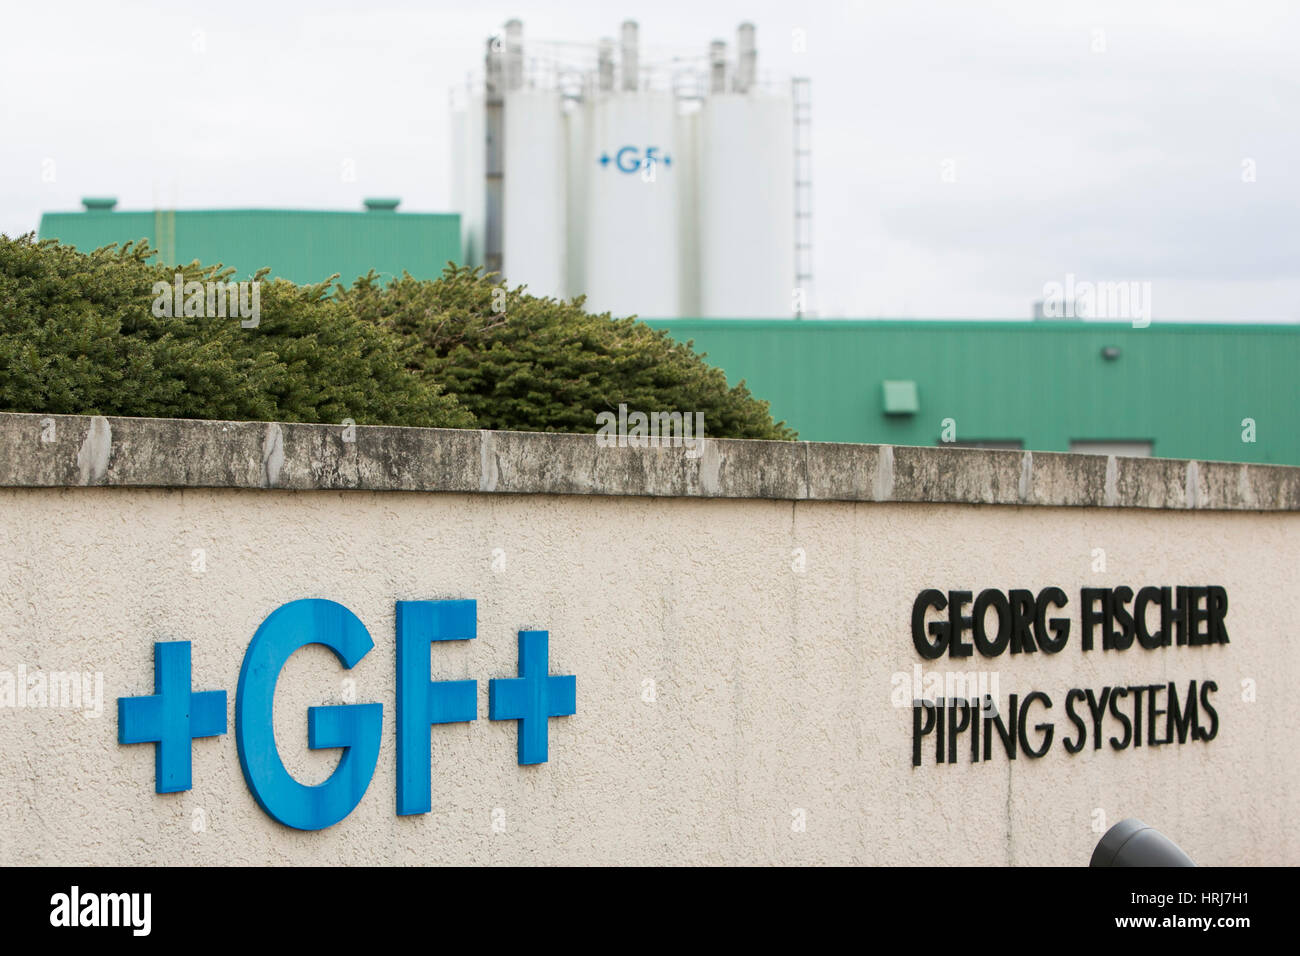 A logo sign outside of a facility occupied by Georg Fischer Piping Systems in Easton, Pennsylvania on February 26, 2017. Stock Photo